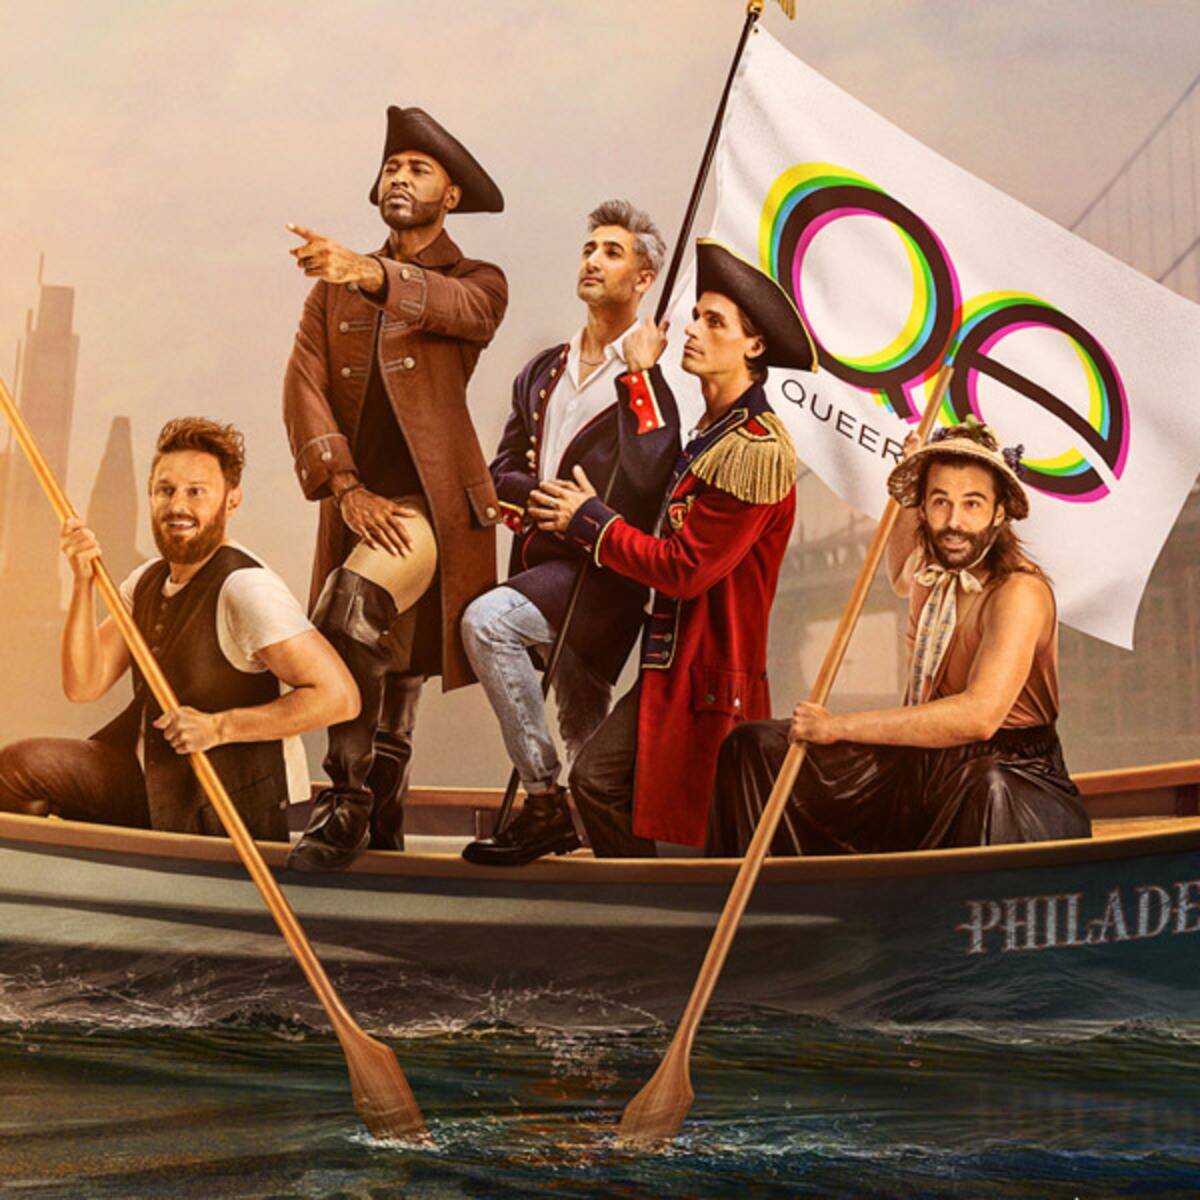 Netflix Is Dropping ‘Queer Eye’ Season 5 Today, So Get Ready To Binge-Watch